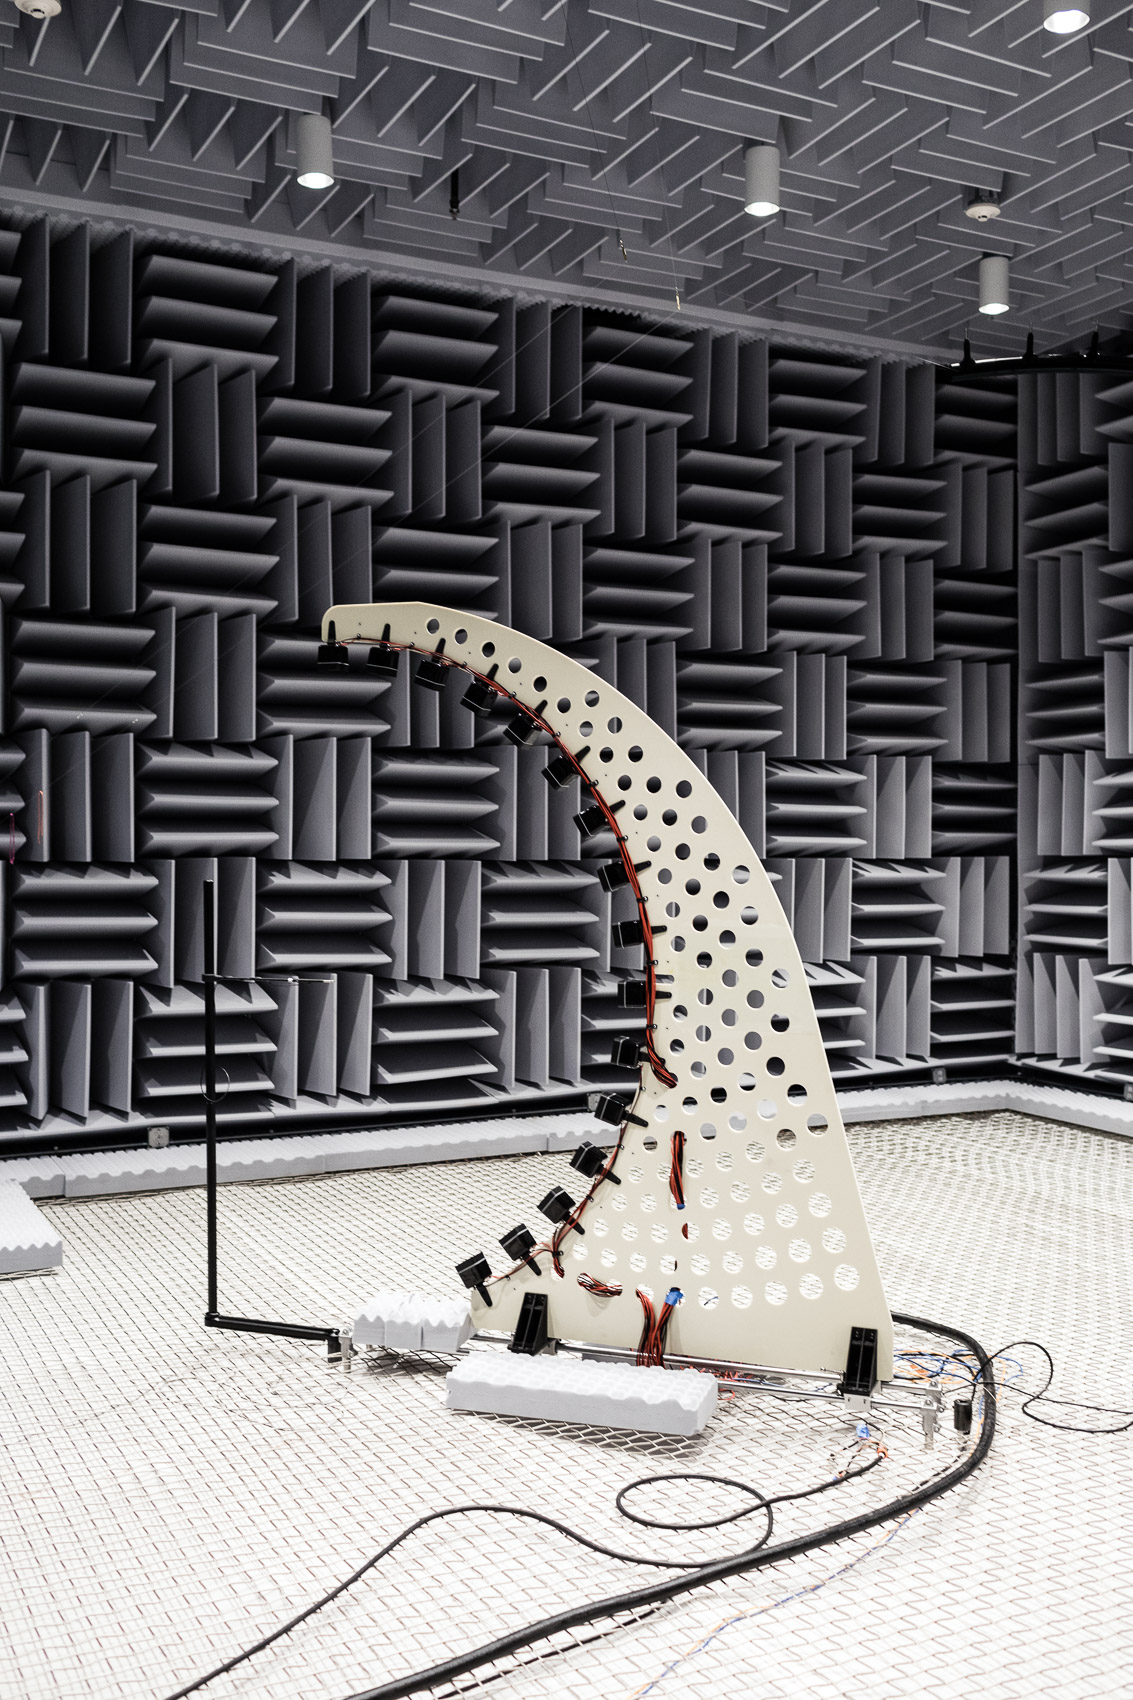 Anechoic chamber at SONOS | Los Angeles | Editorial and Commercial Photographer Patrick Strattner